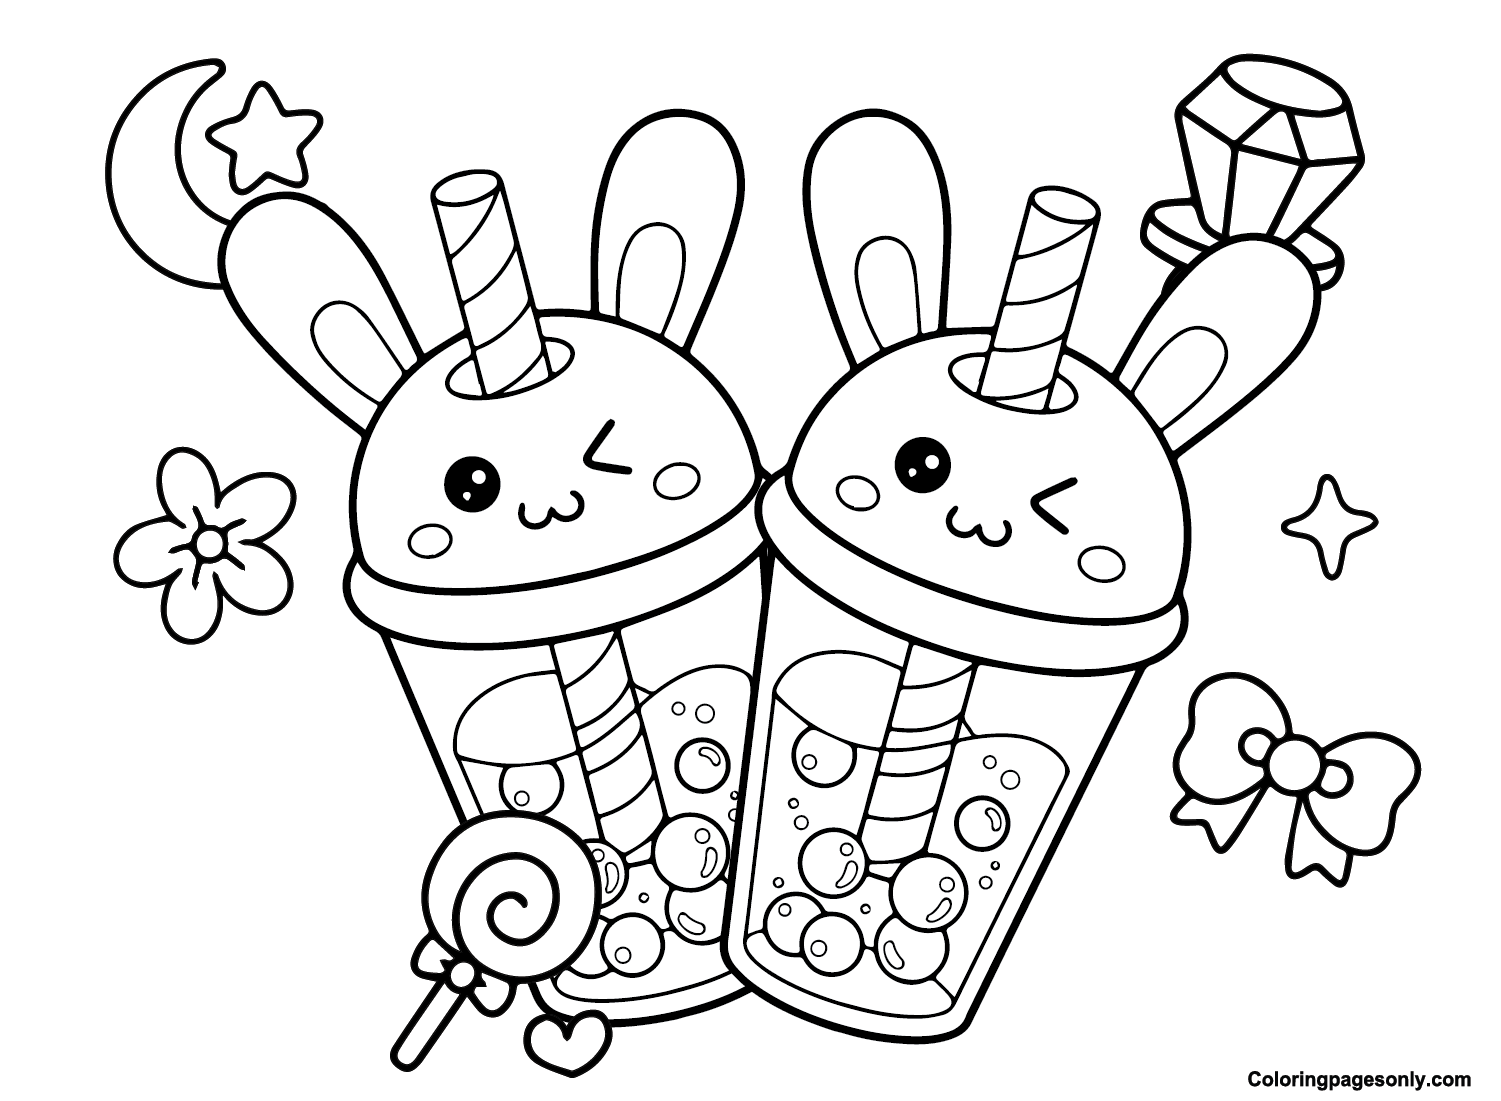 Boba Tea Coloring Pages | Bunny ...